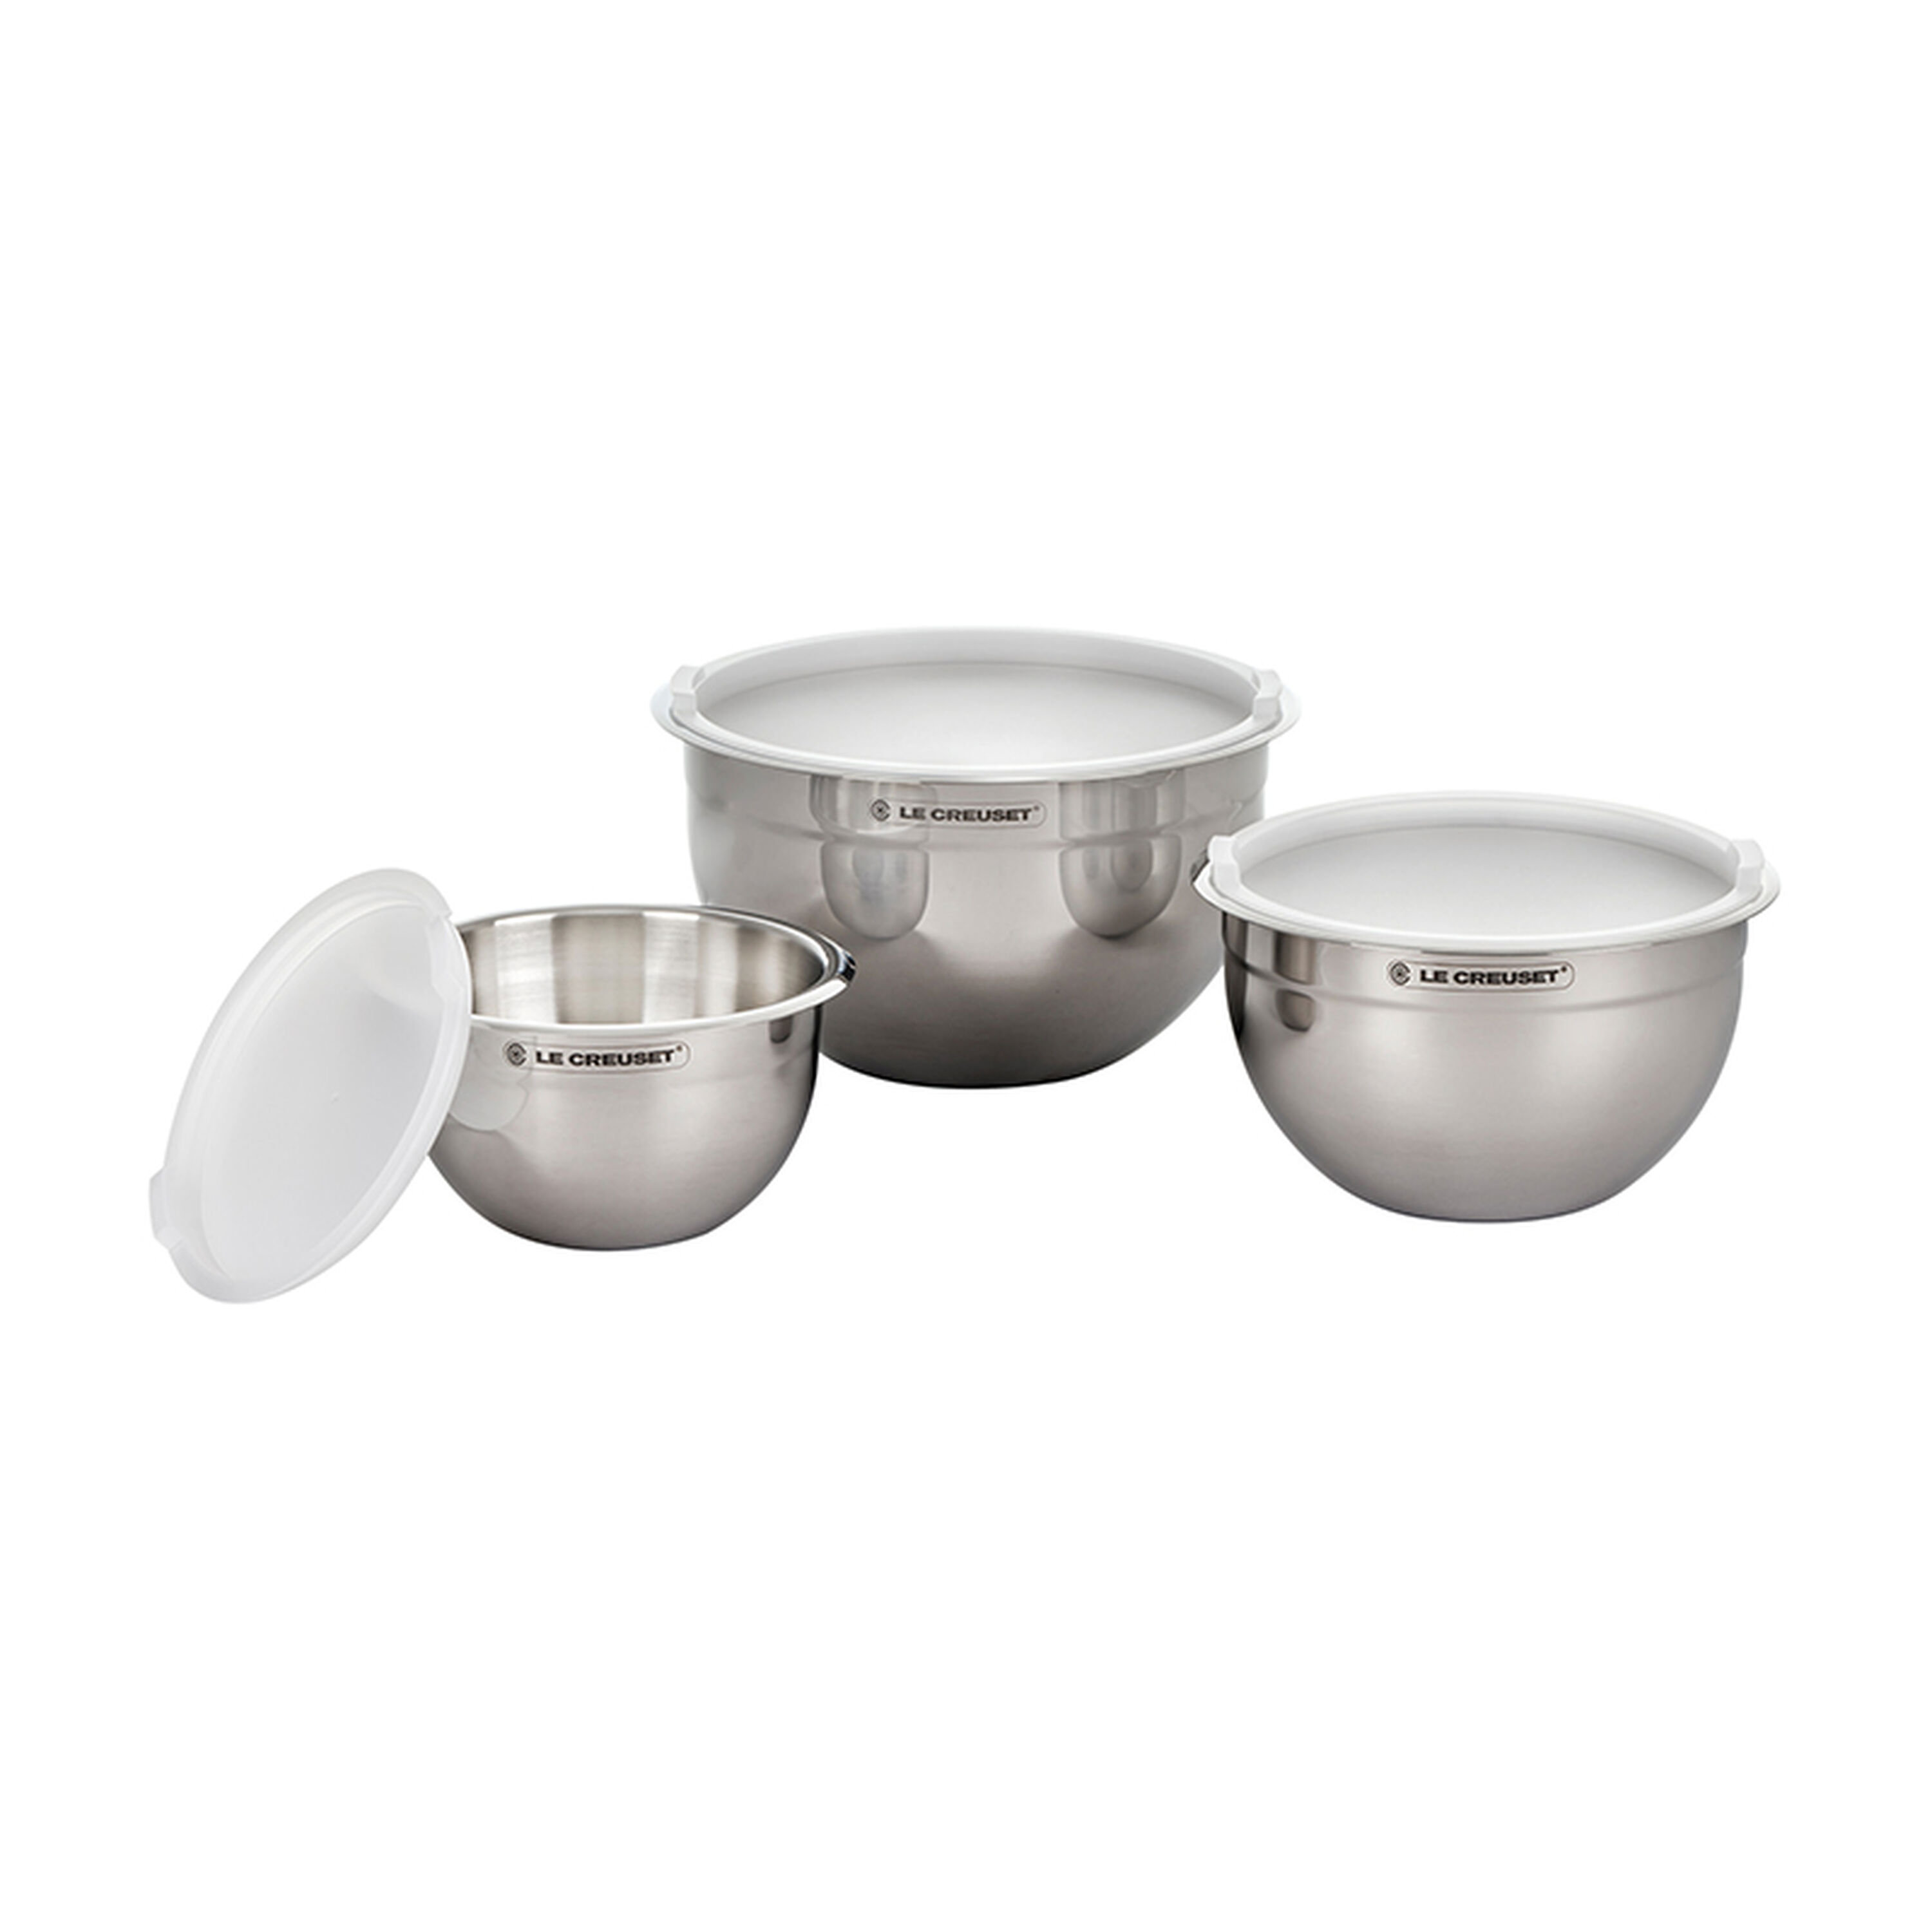  Tramontina Double Wall Stainless Steel Mixing Bowls (3